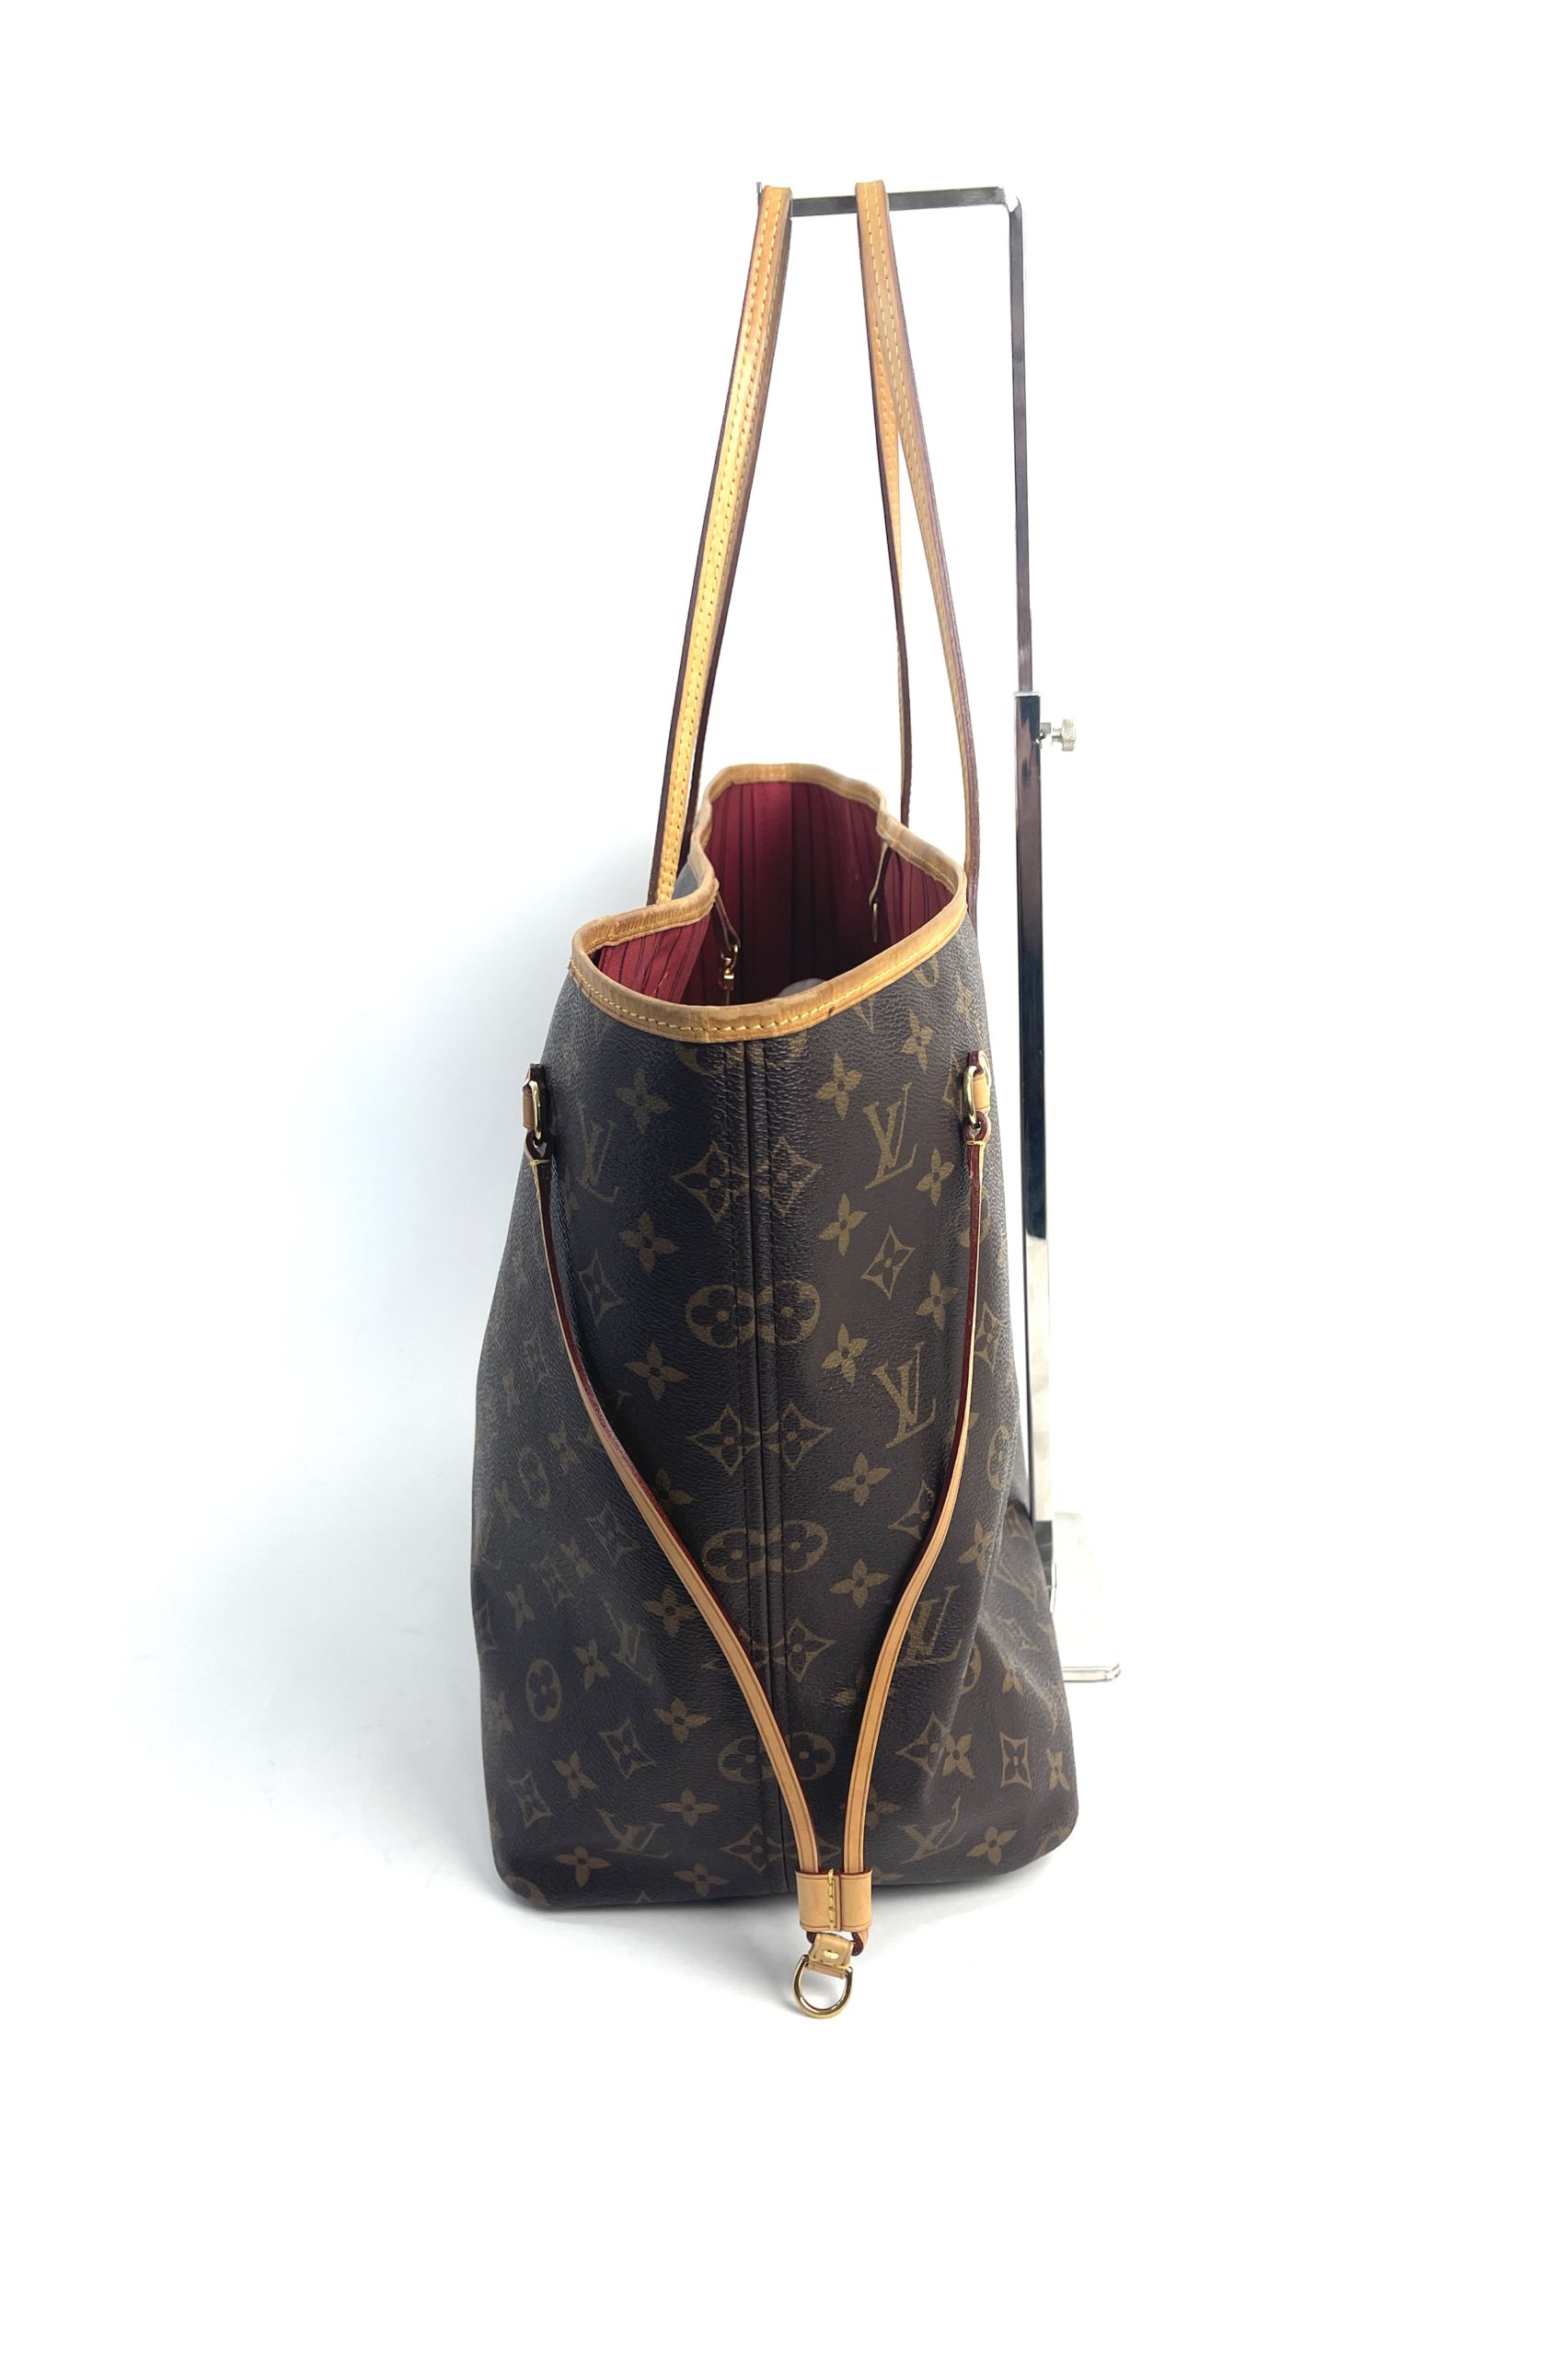 Louis Vuitton Neverfull Gm Tote bag – JOY'S CLASSY COLLECTION